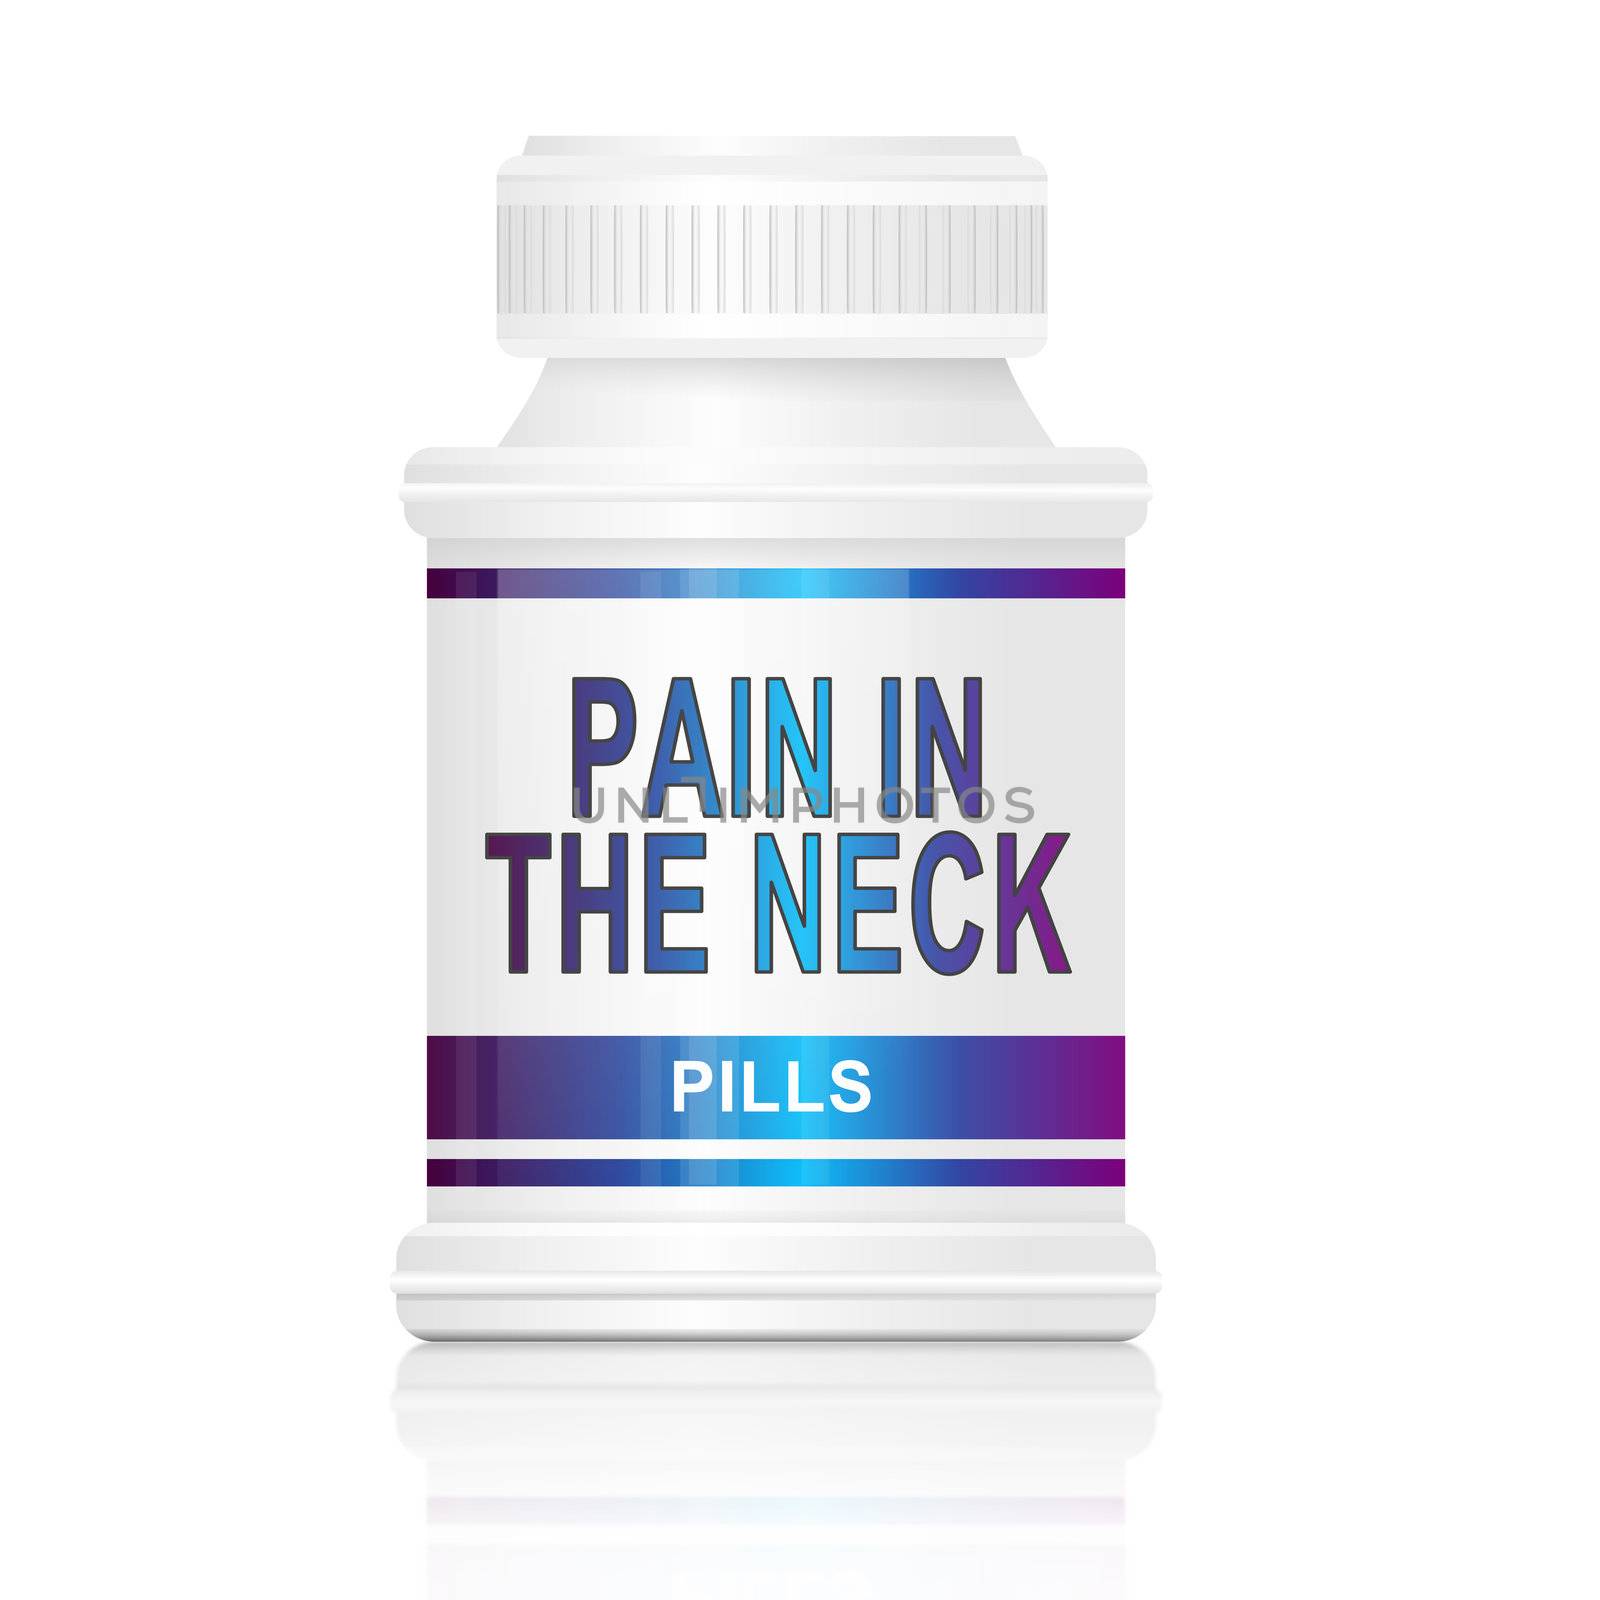 Illustration depicting a single medication container with the words 'pain in the neck pills' on the front with white background.